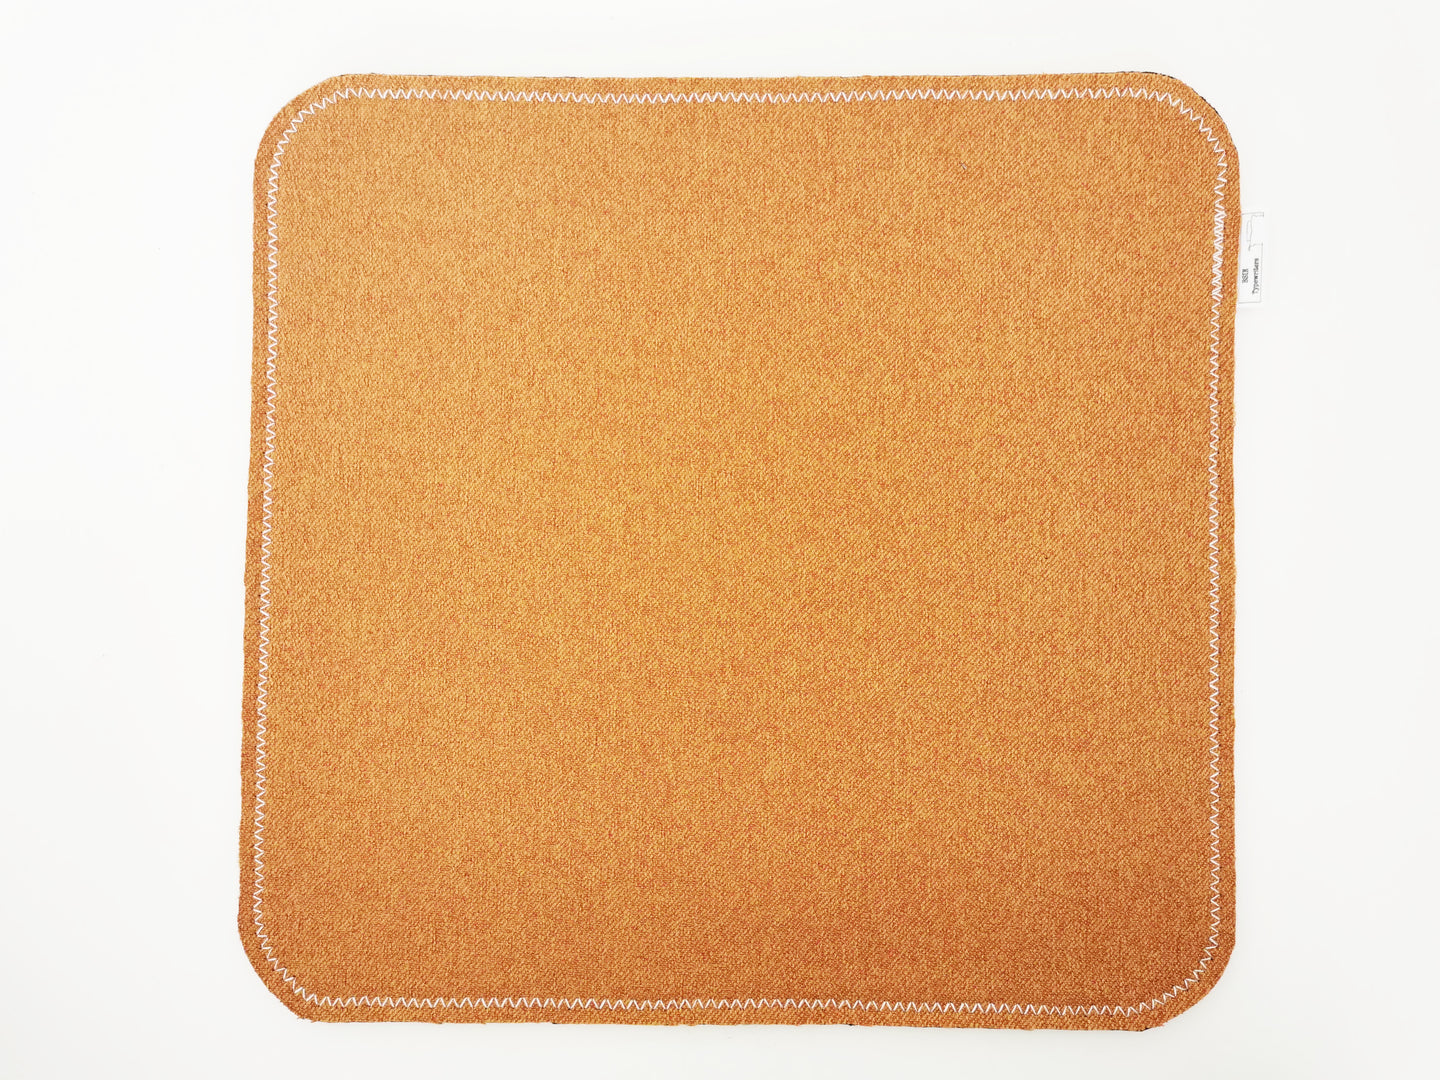 Typewriter Pad - Dampening Sound And Providing a Non-slip surface - Yellow